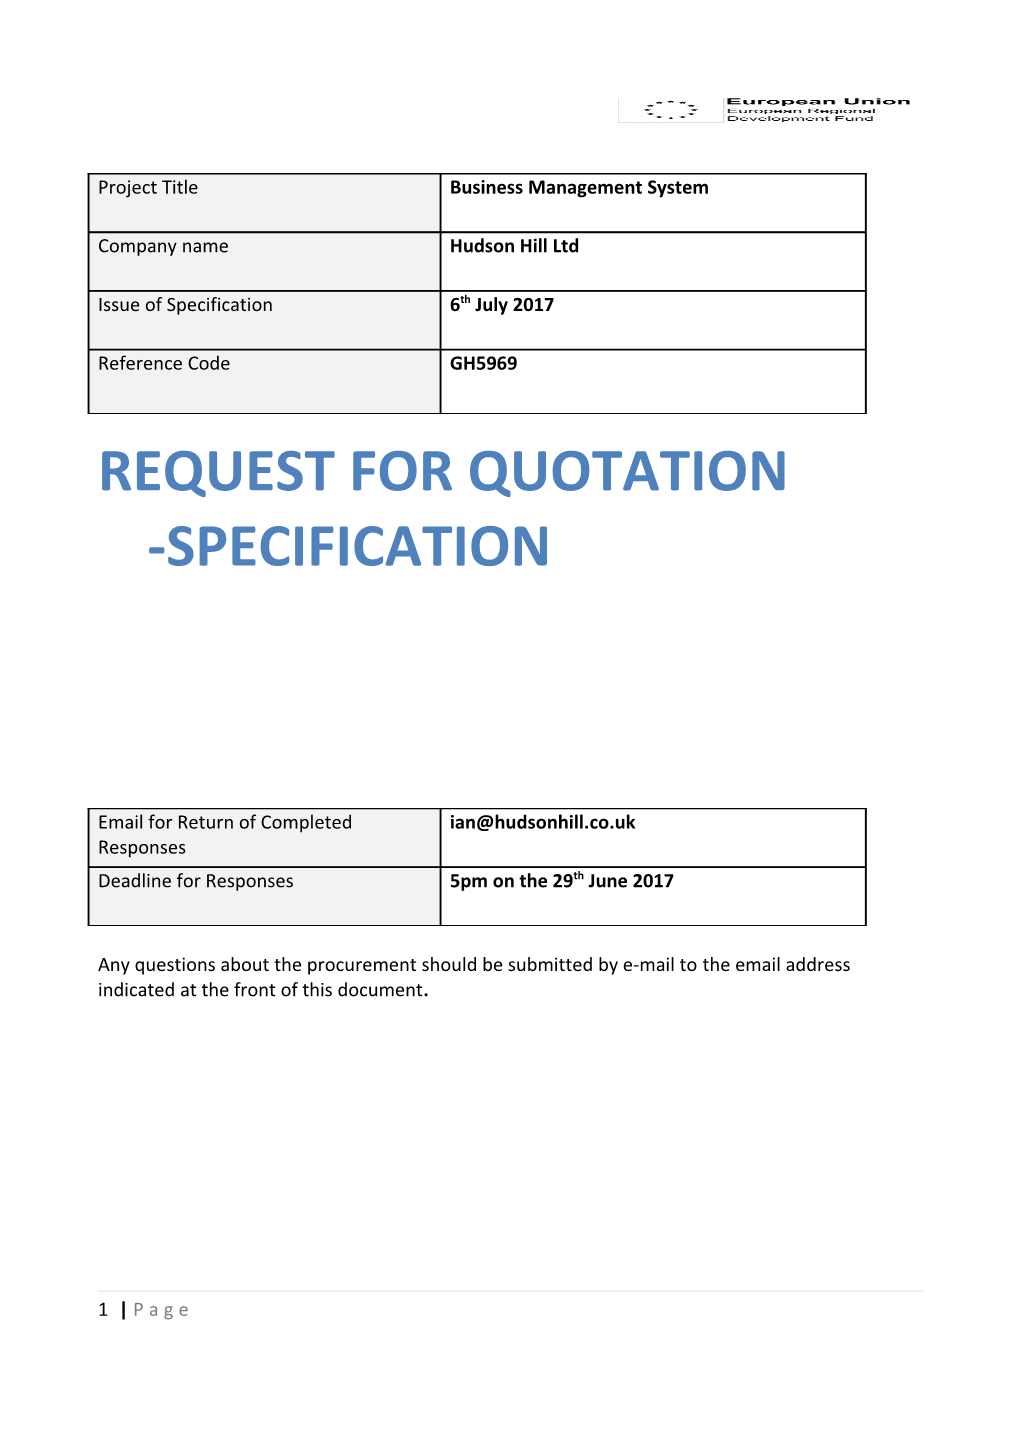 Request for Quotation -Specification s1